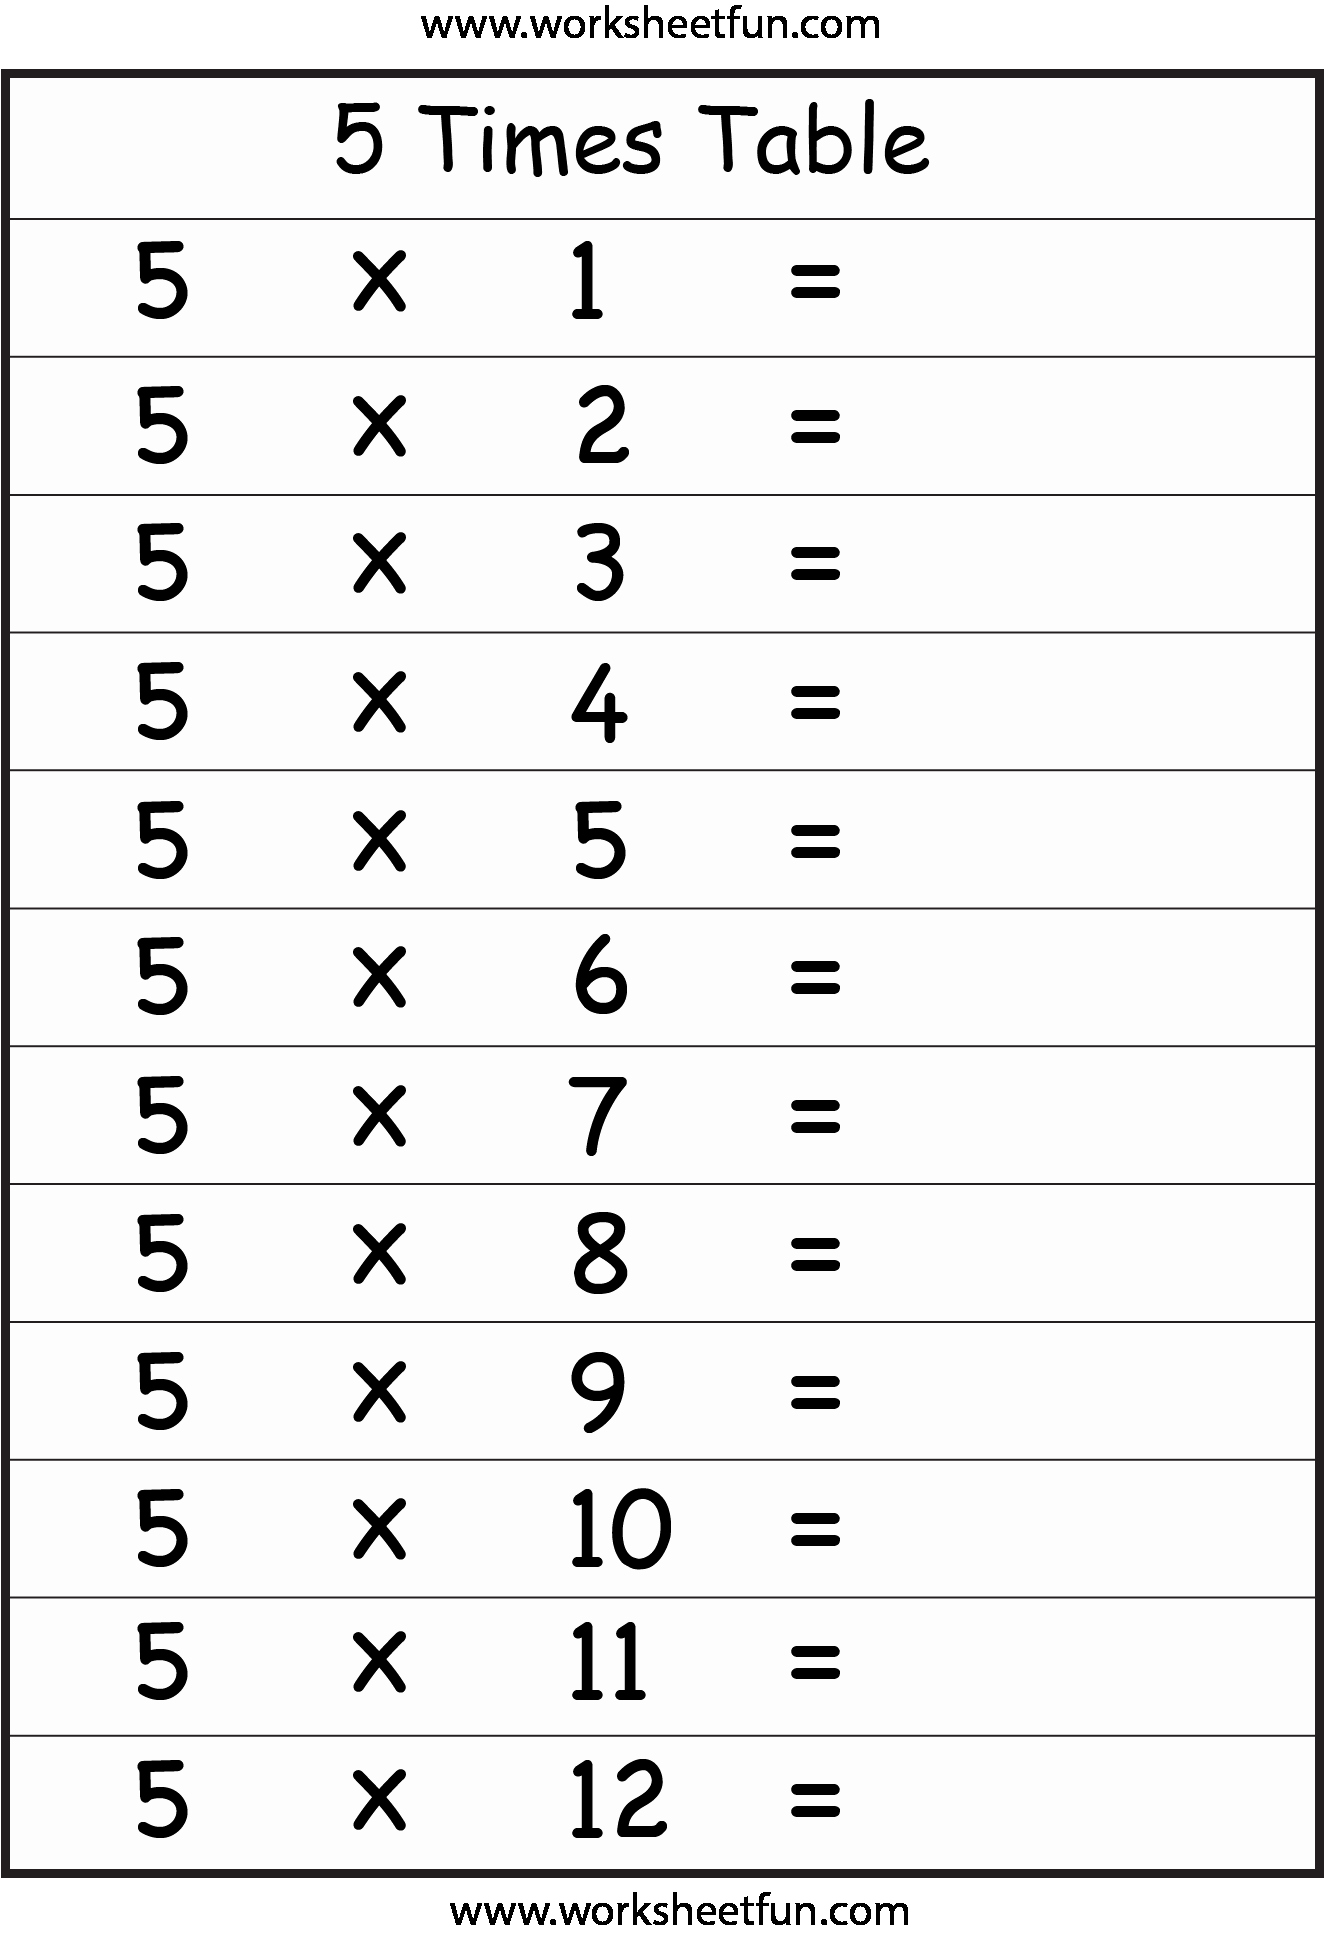 3 Times Table Worksheet Unique Pin On Printable Worksheets